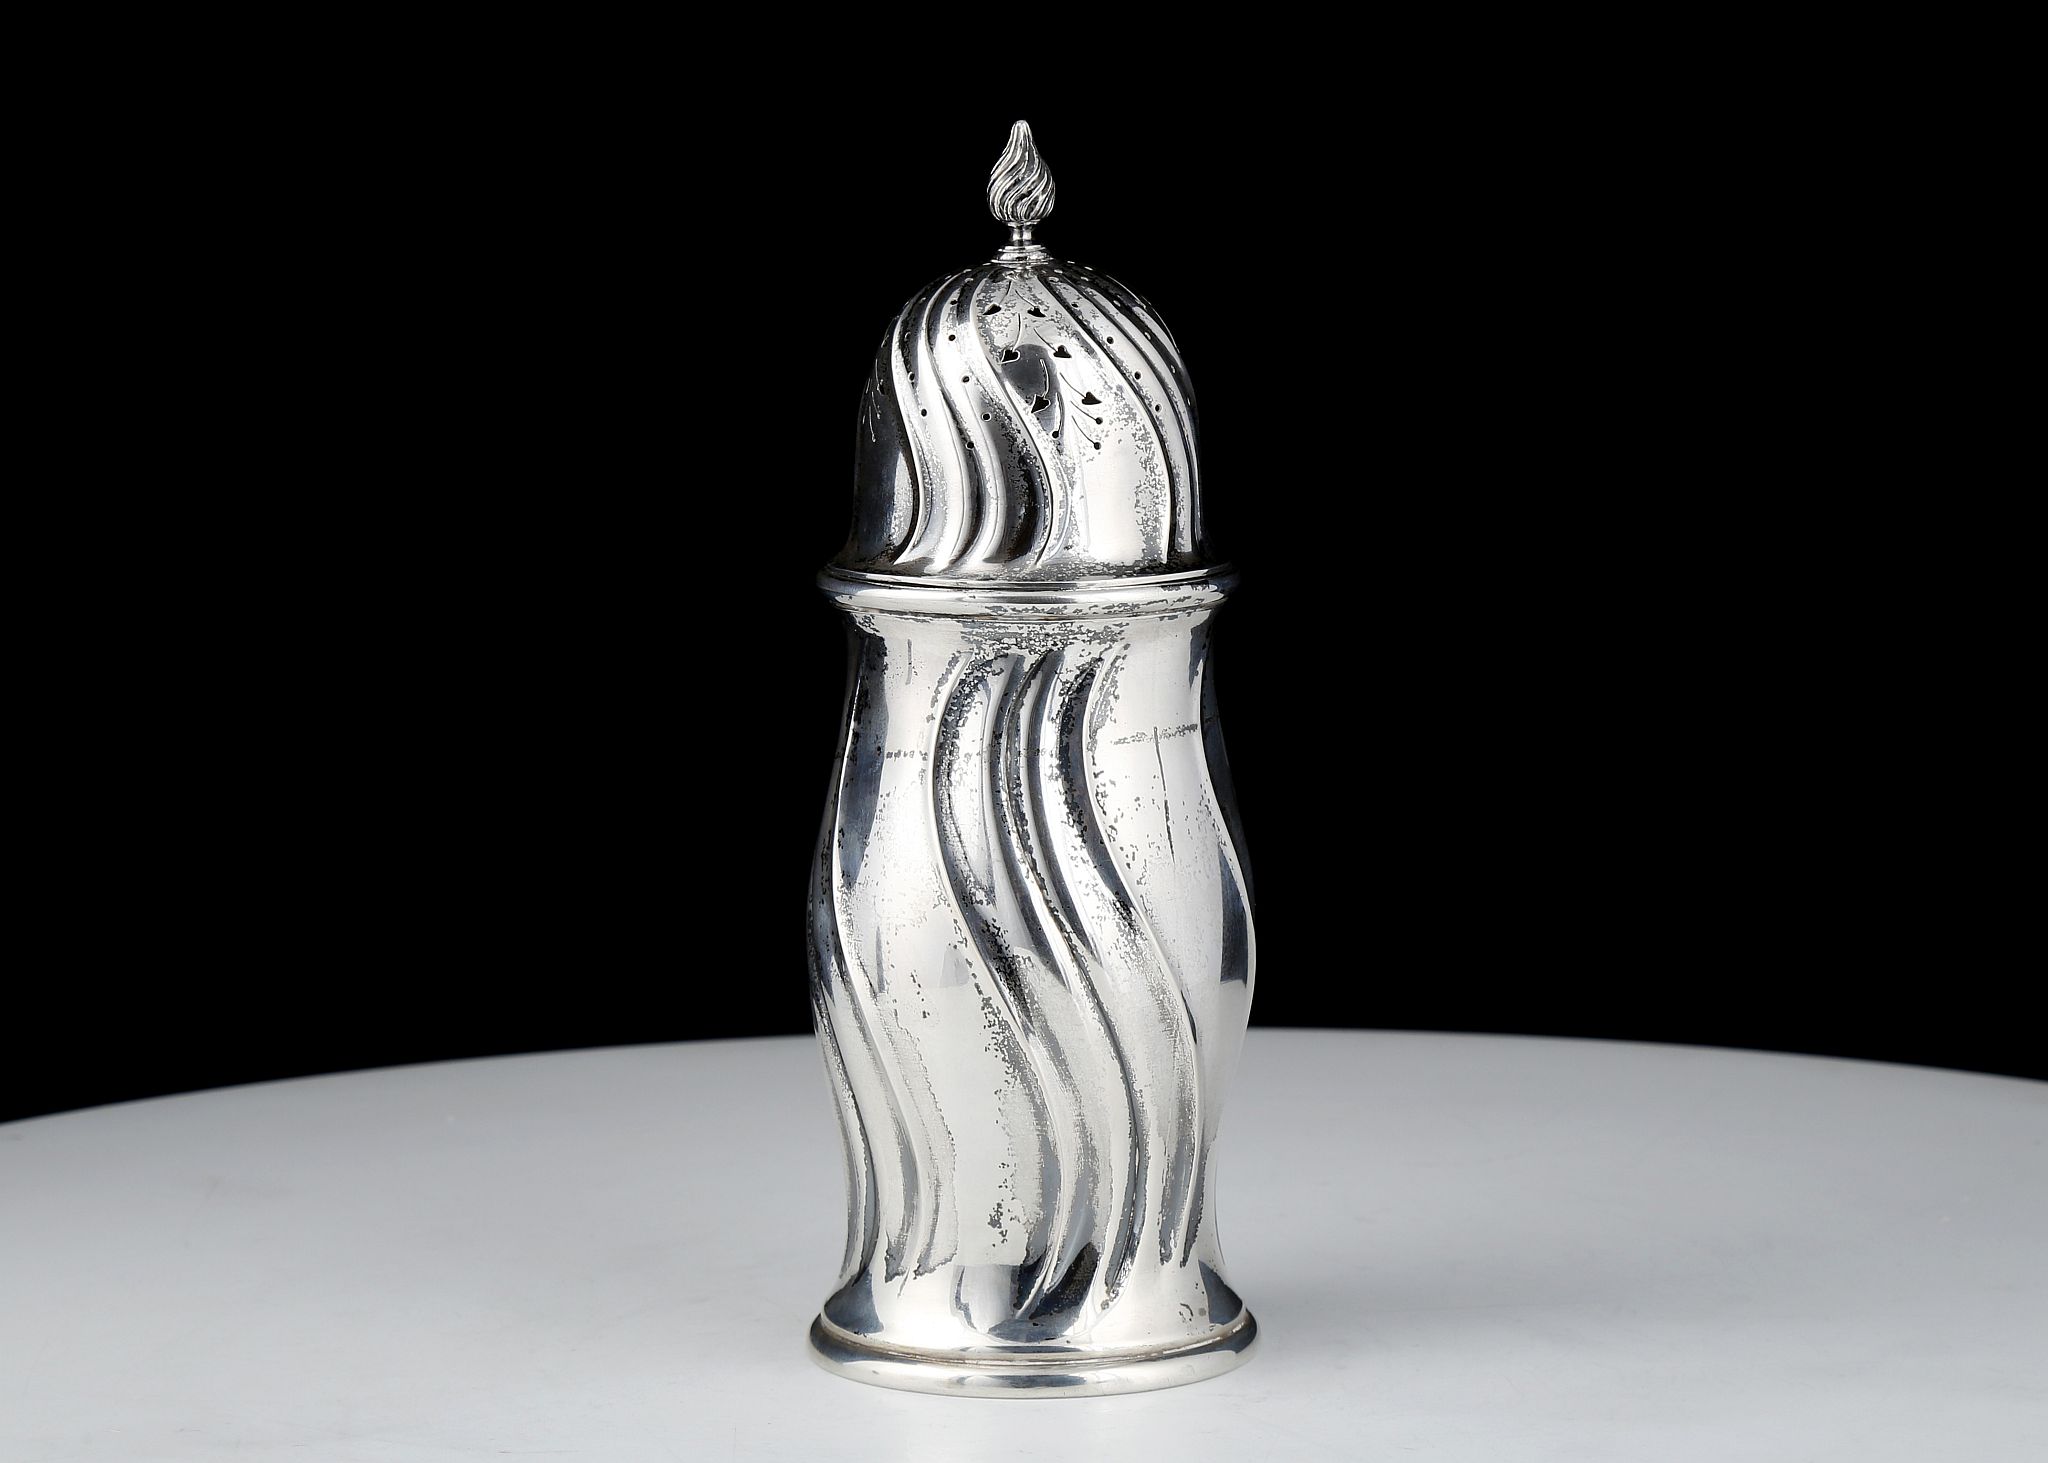 Antique Danish Sterling Silver sugar castor marked Copenhagen, 1917. The shaped body with undulating